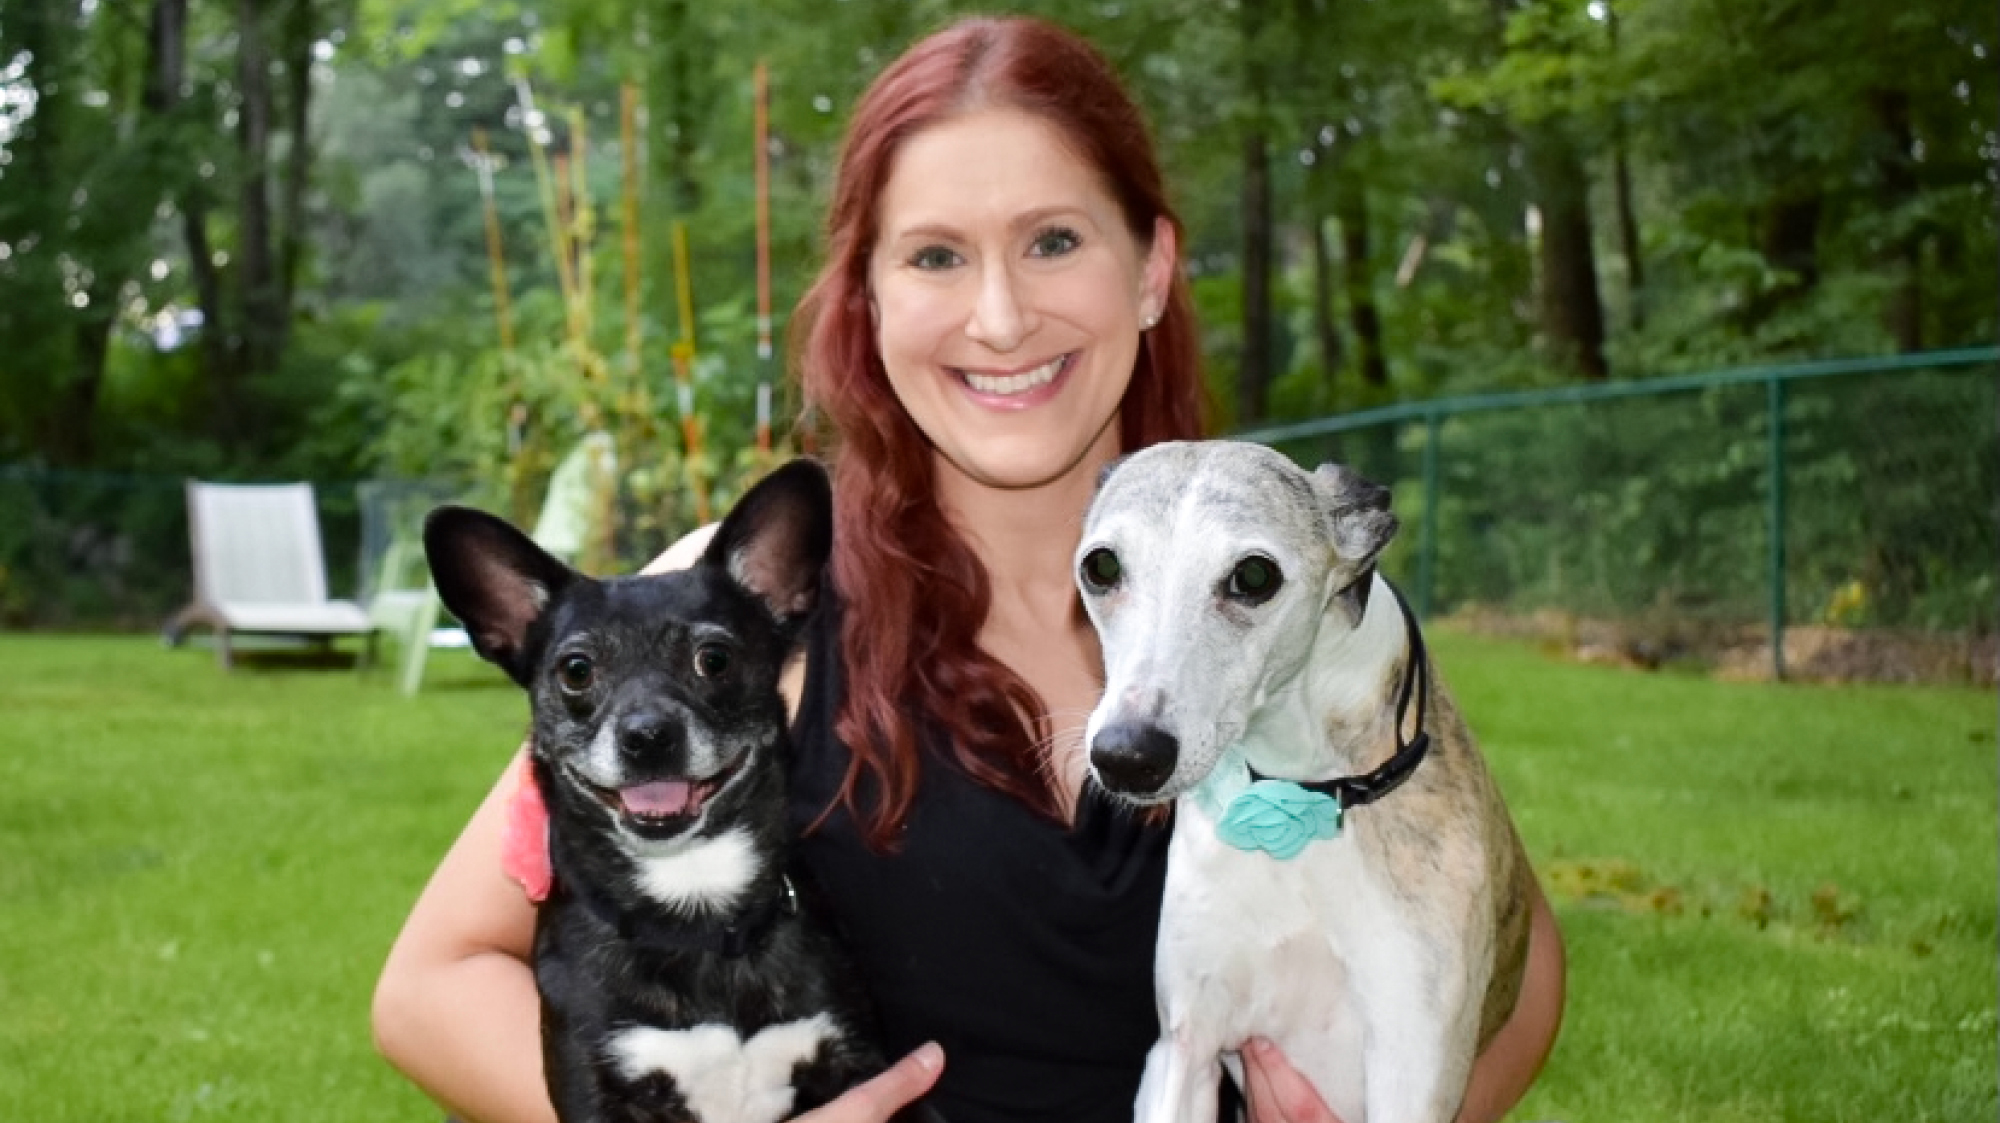 Katy Cassano with her 2 dogs